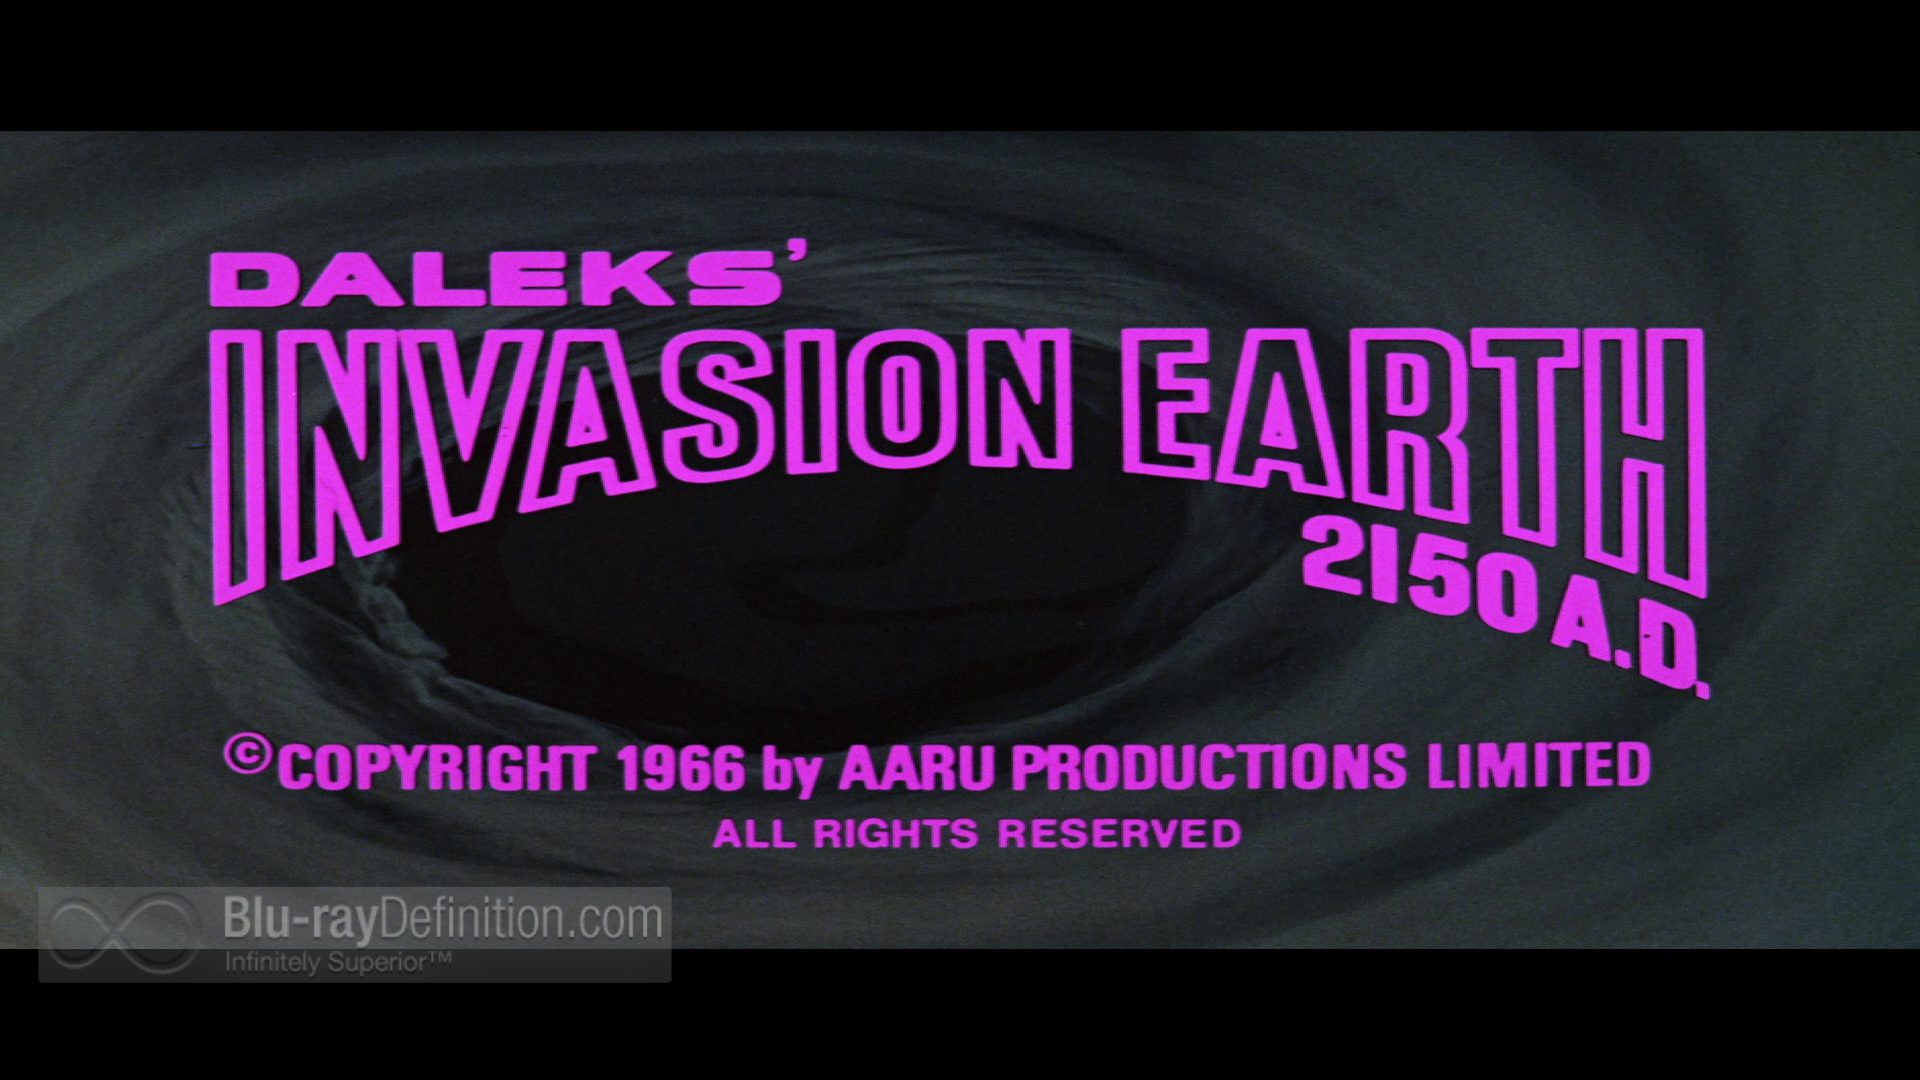 Invasion Earth 2150 A.D. [1966]